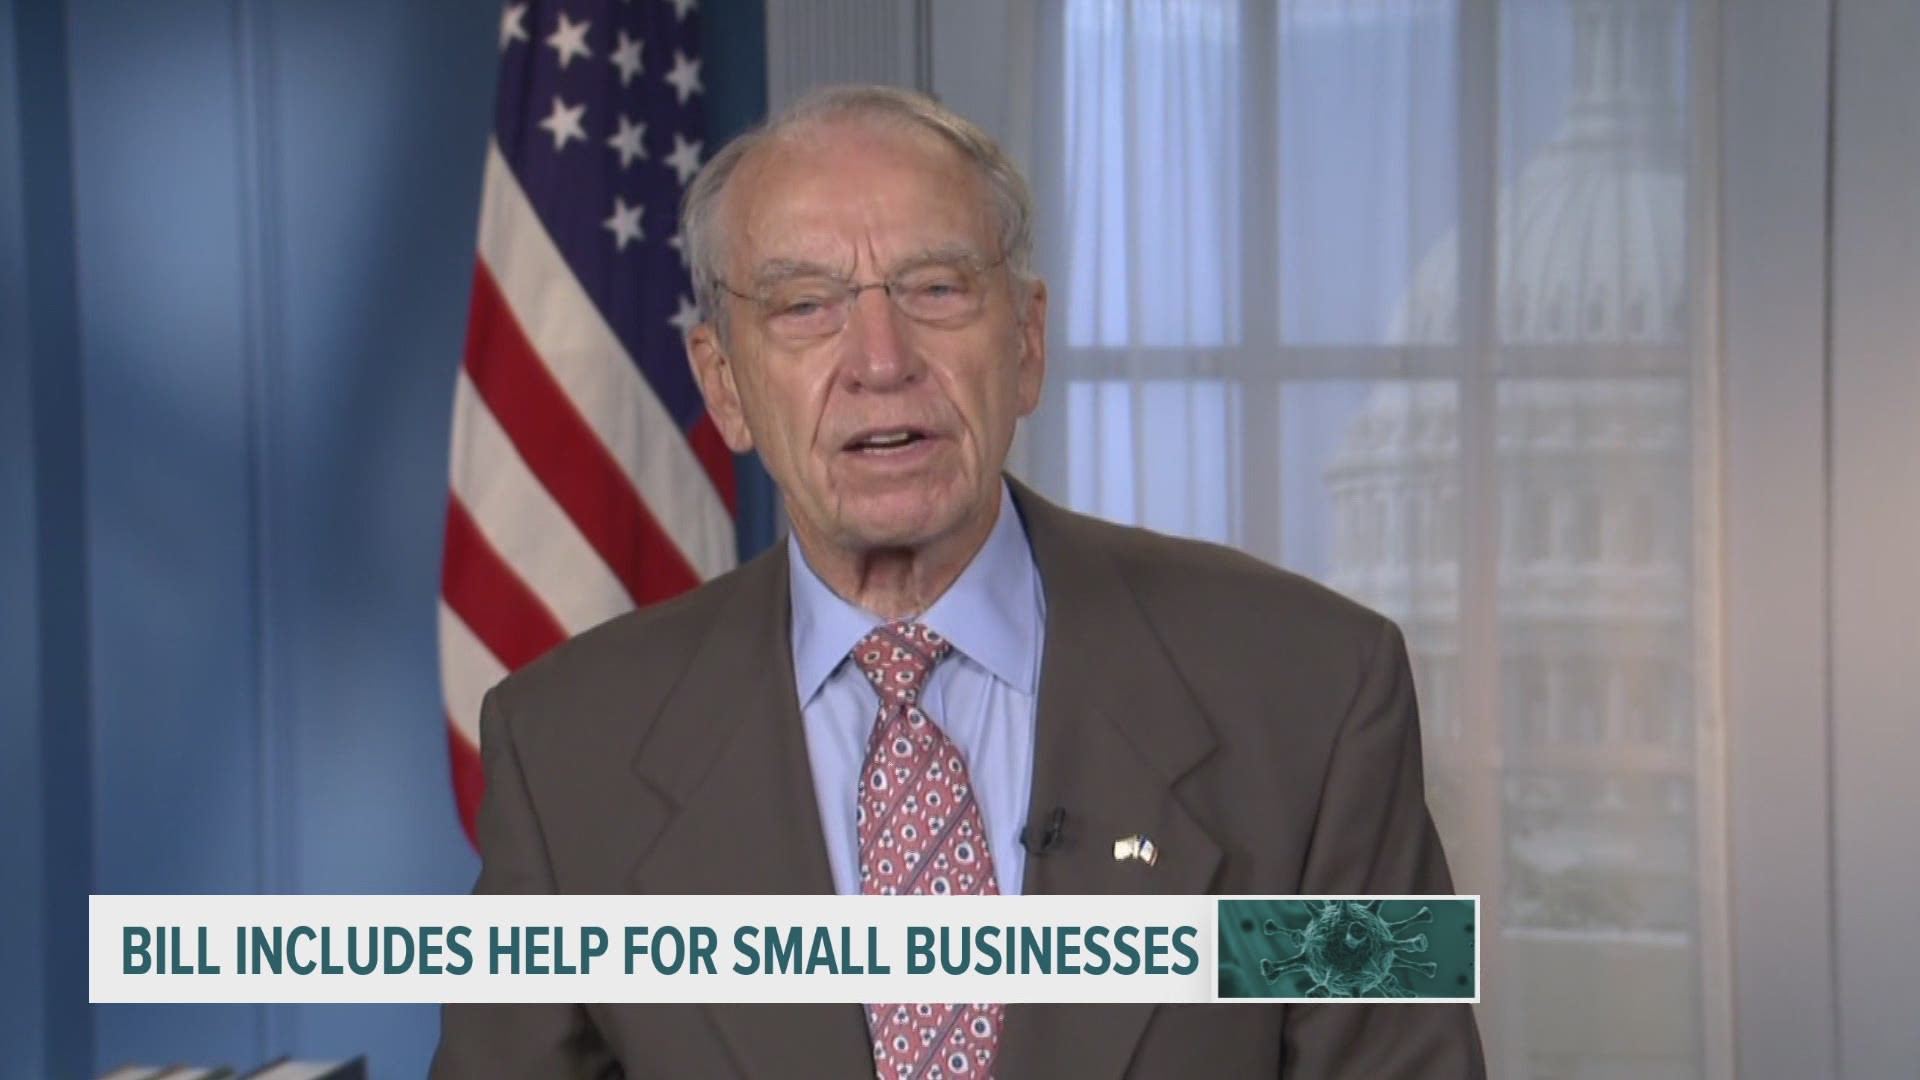 Sen. Grassley says the bill includes help for small businesses and for schools who are spending extra money on sanitation measures.